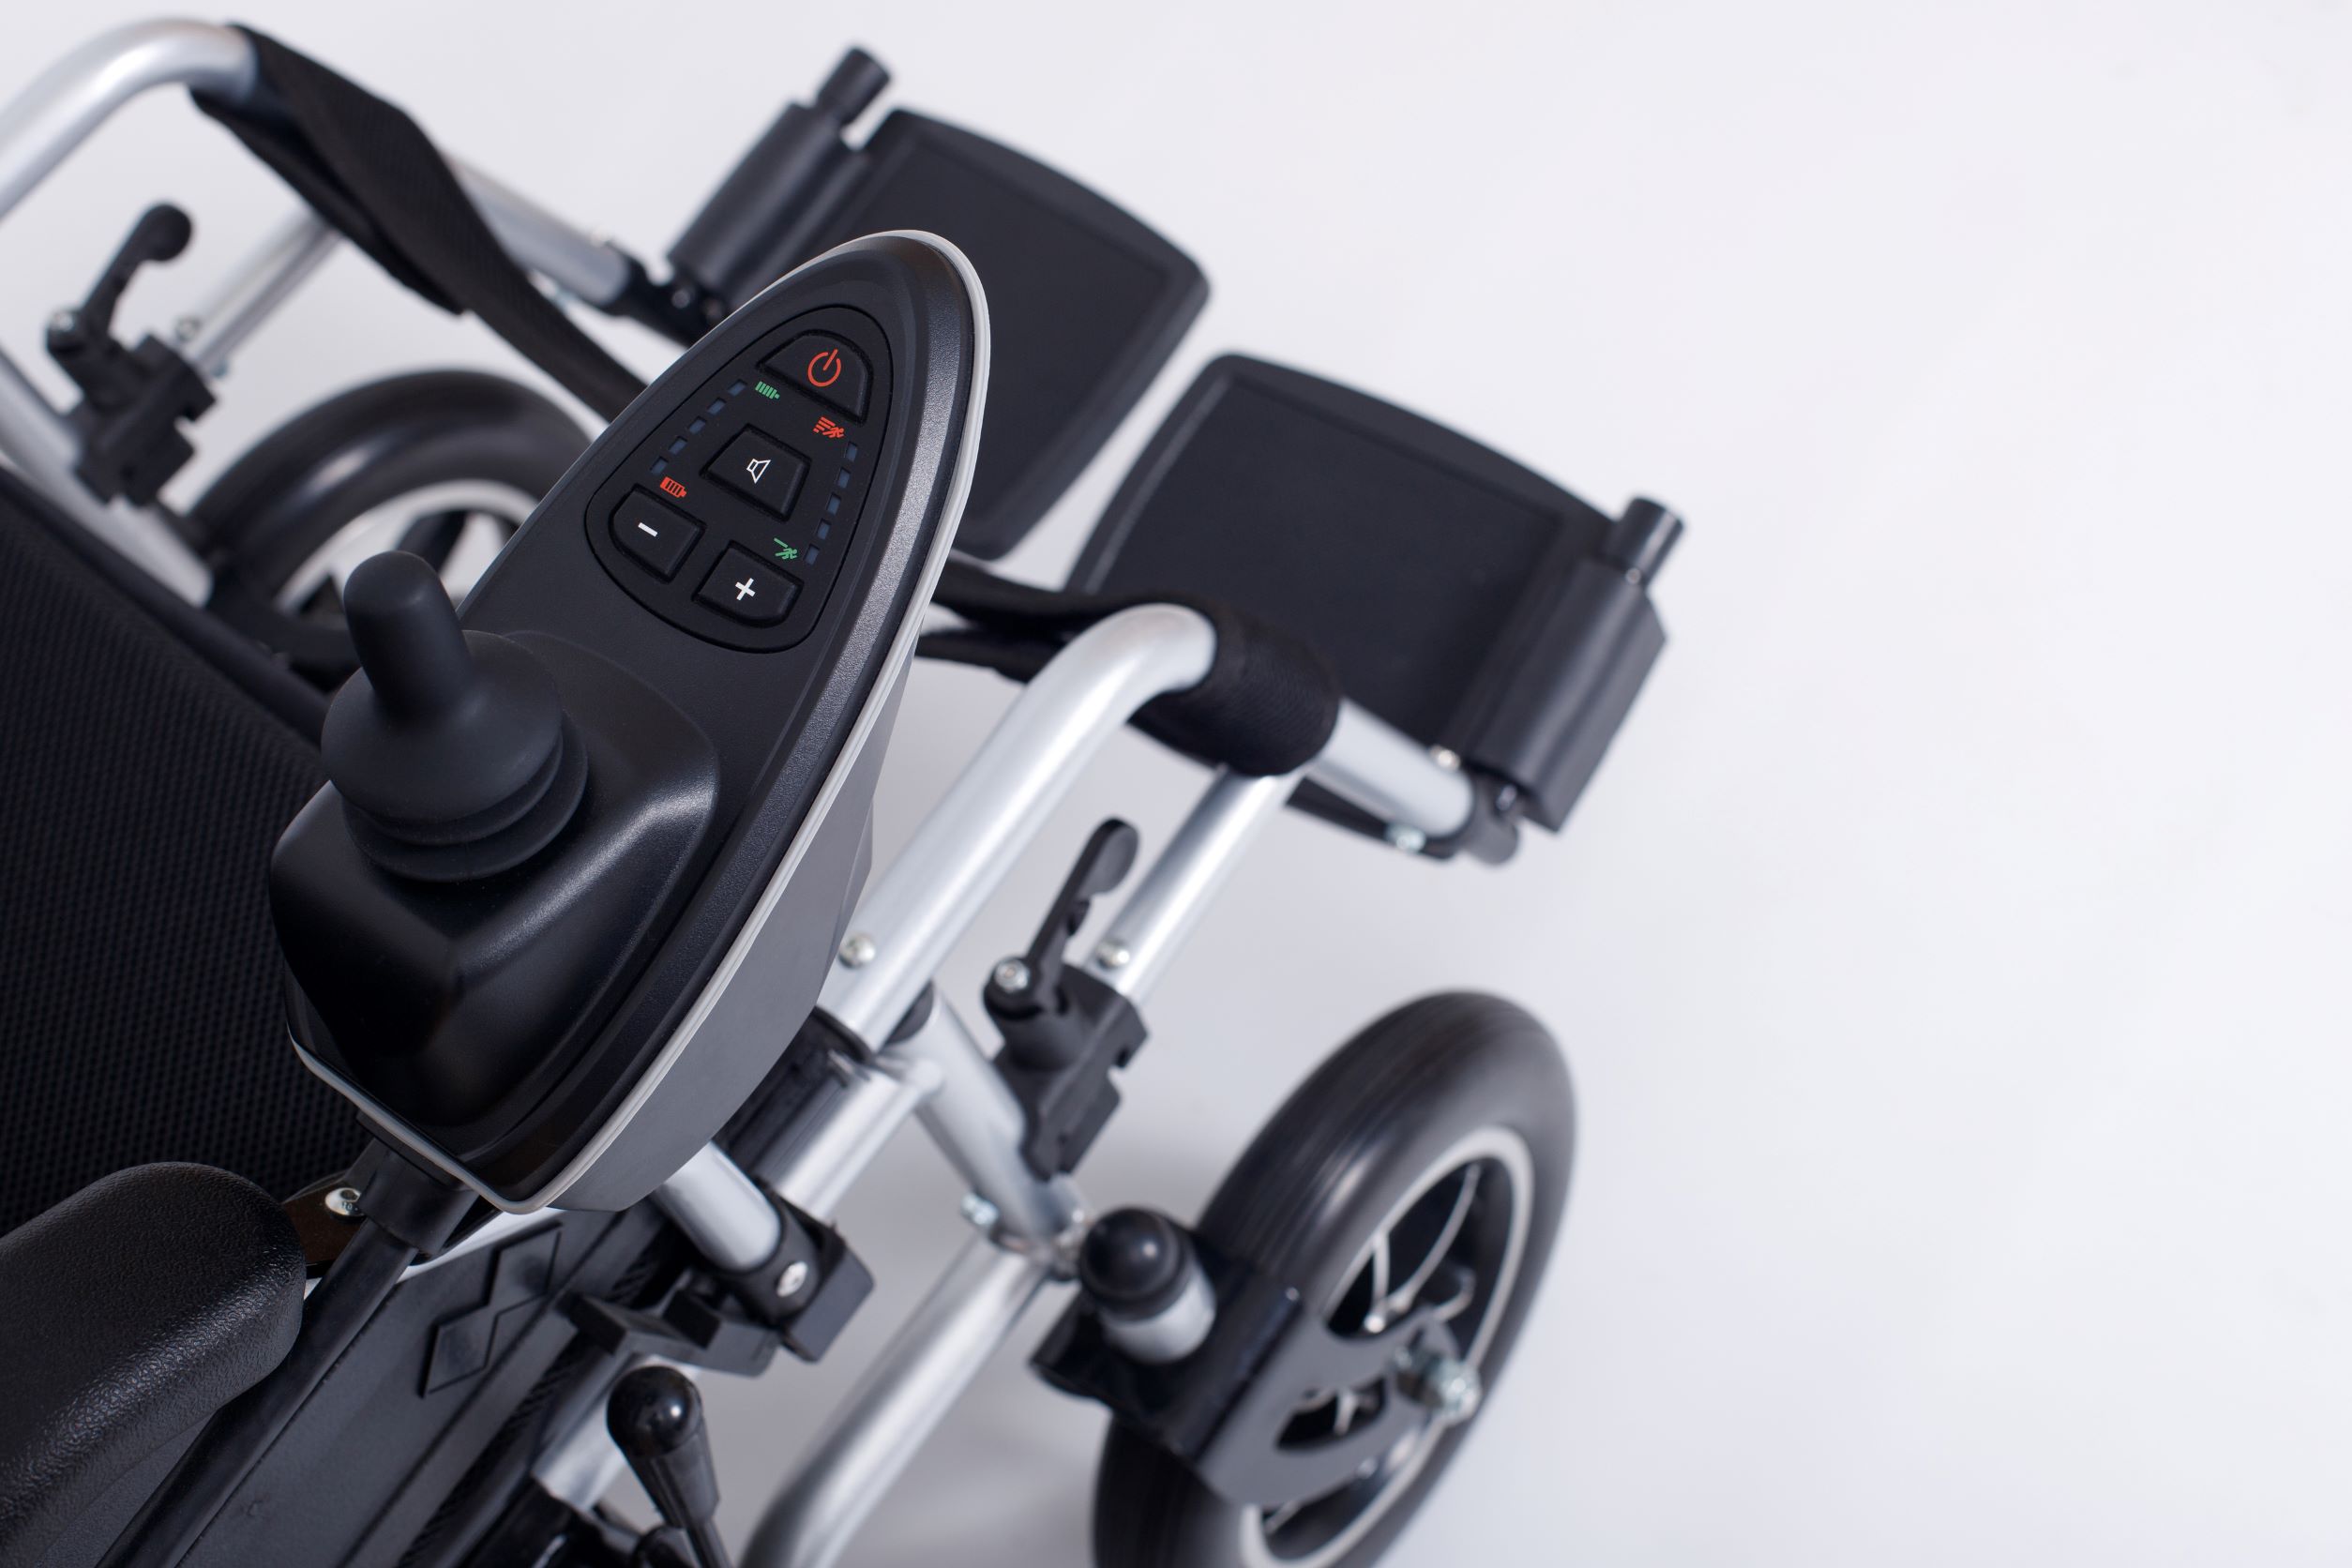 New charging stations for electric mobility devices now available